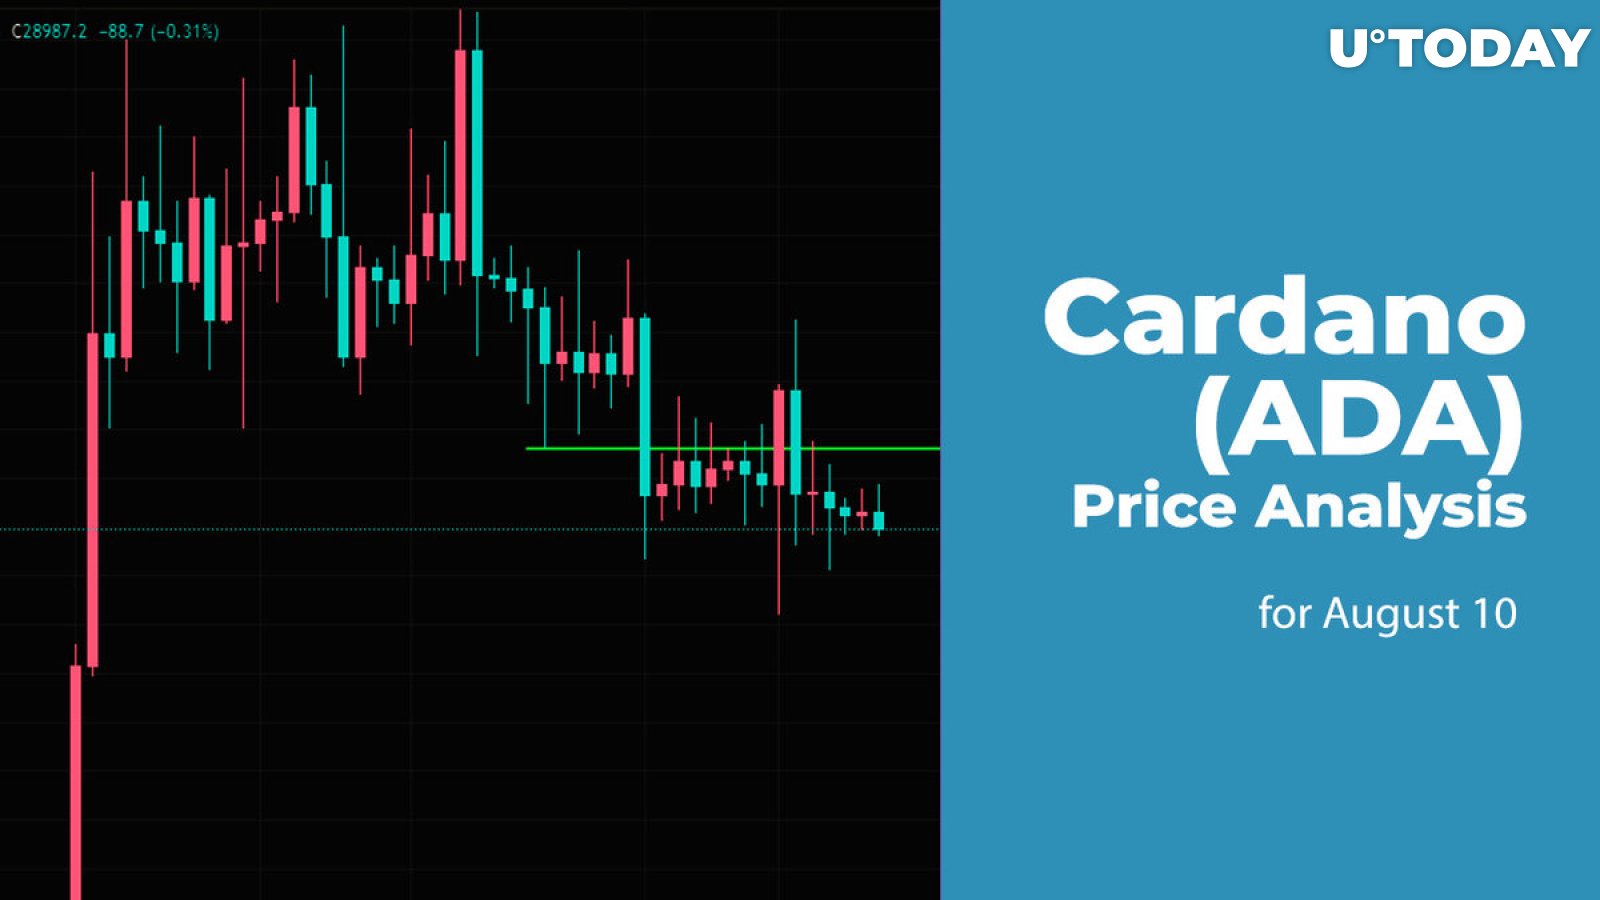 Cardano (ADA) Price Analysis for August 10